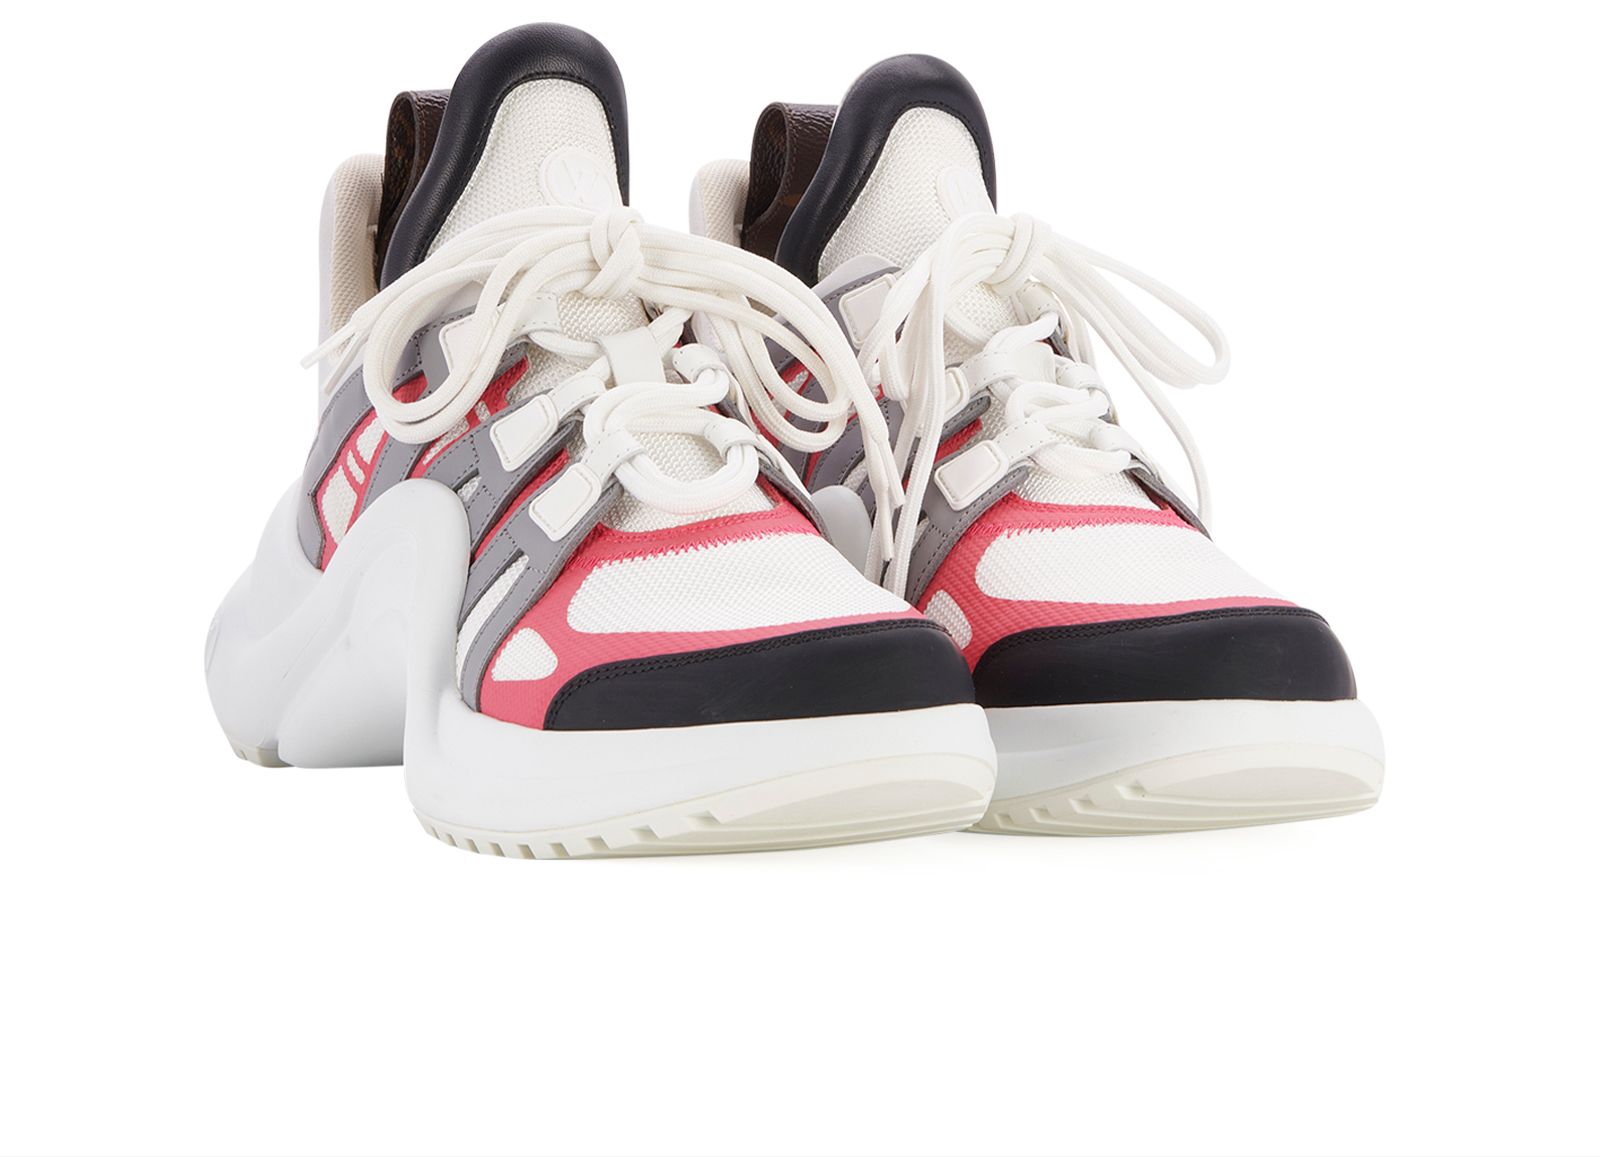 Louis Vuitton Khaki And Pink Archlight Trainers Size 38 – EVEYSPRELOVED